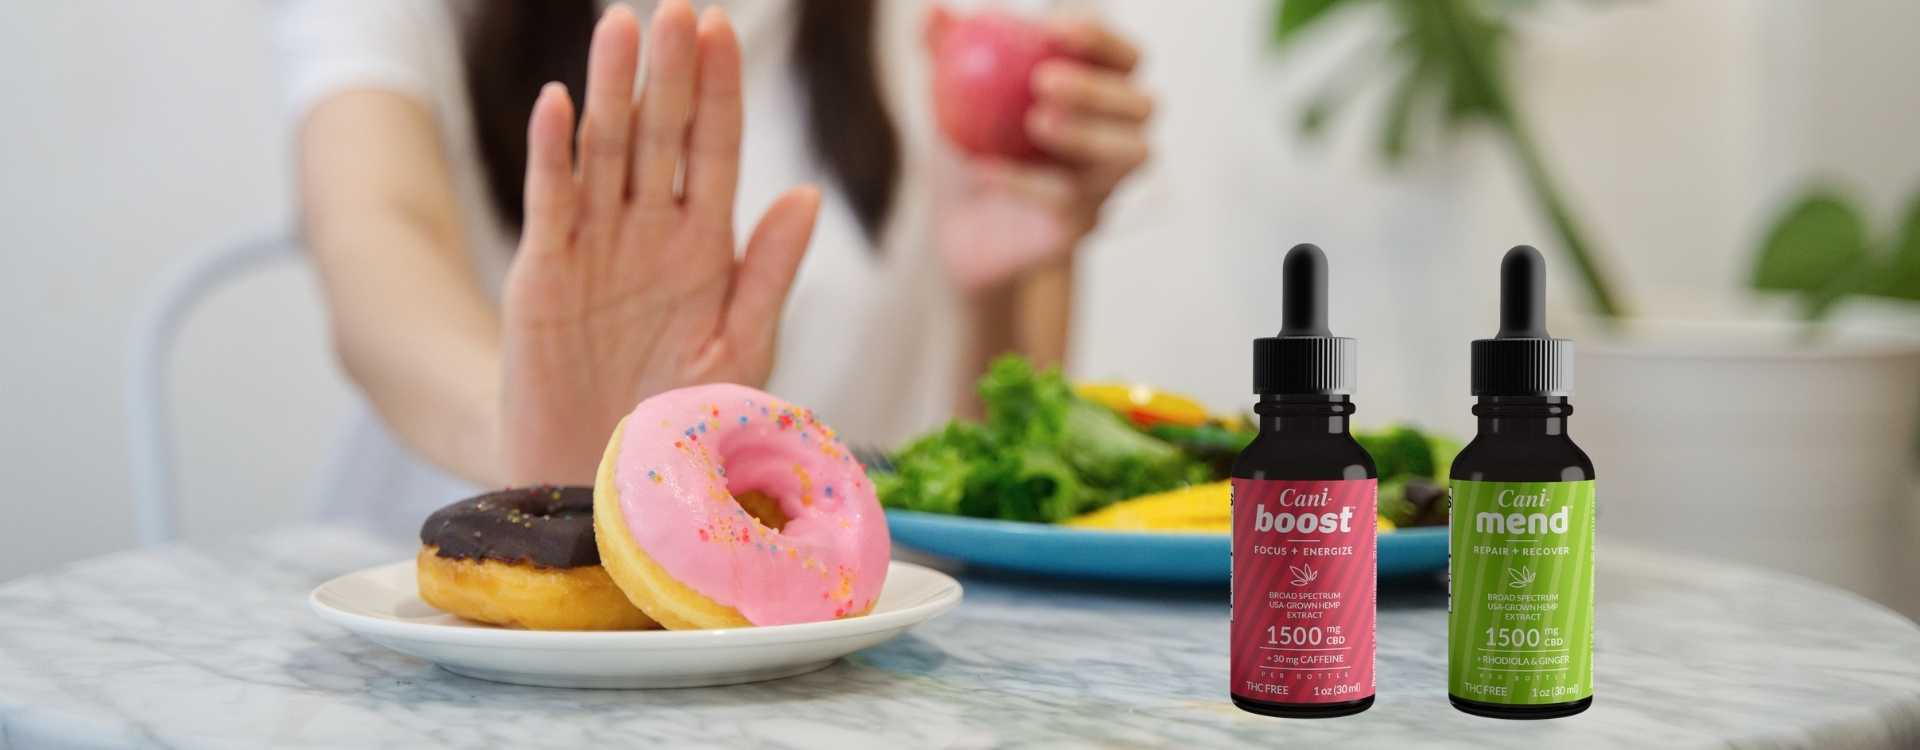 Alt=“Two CBD oil tinctures between a healthy salad and two donuts”